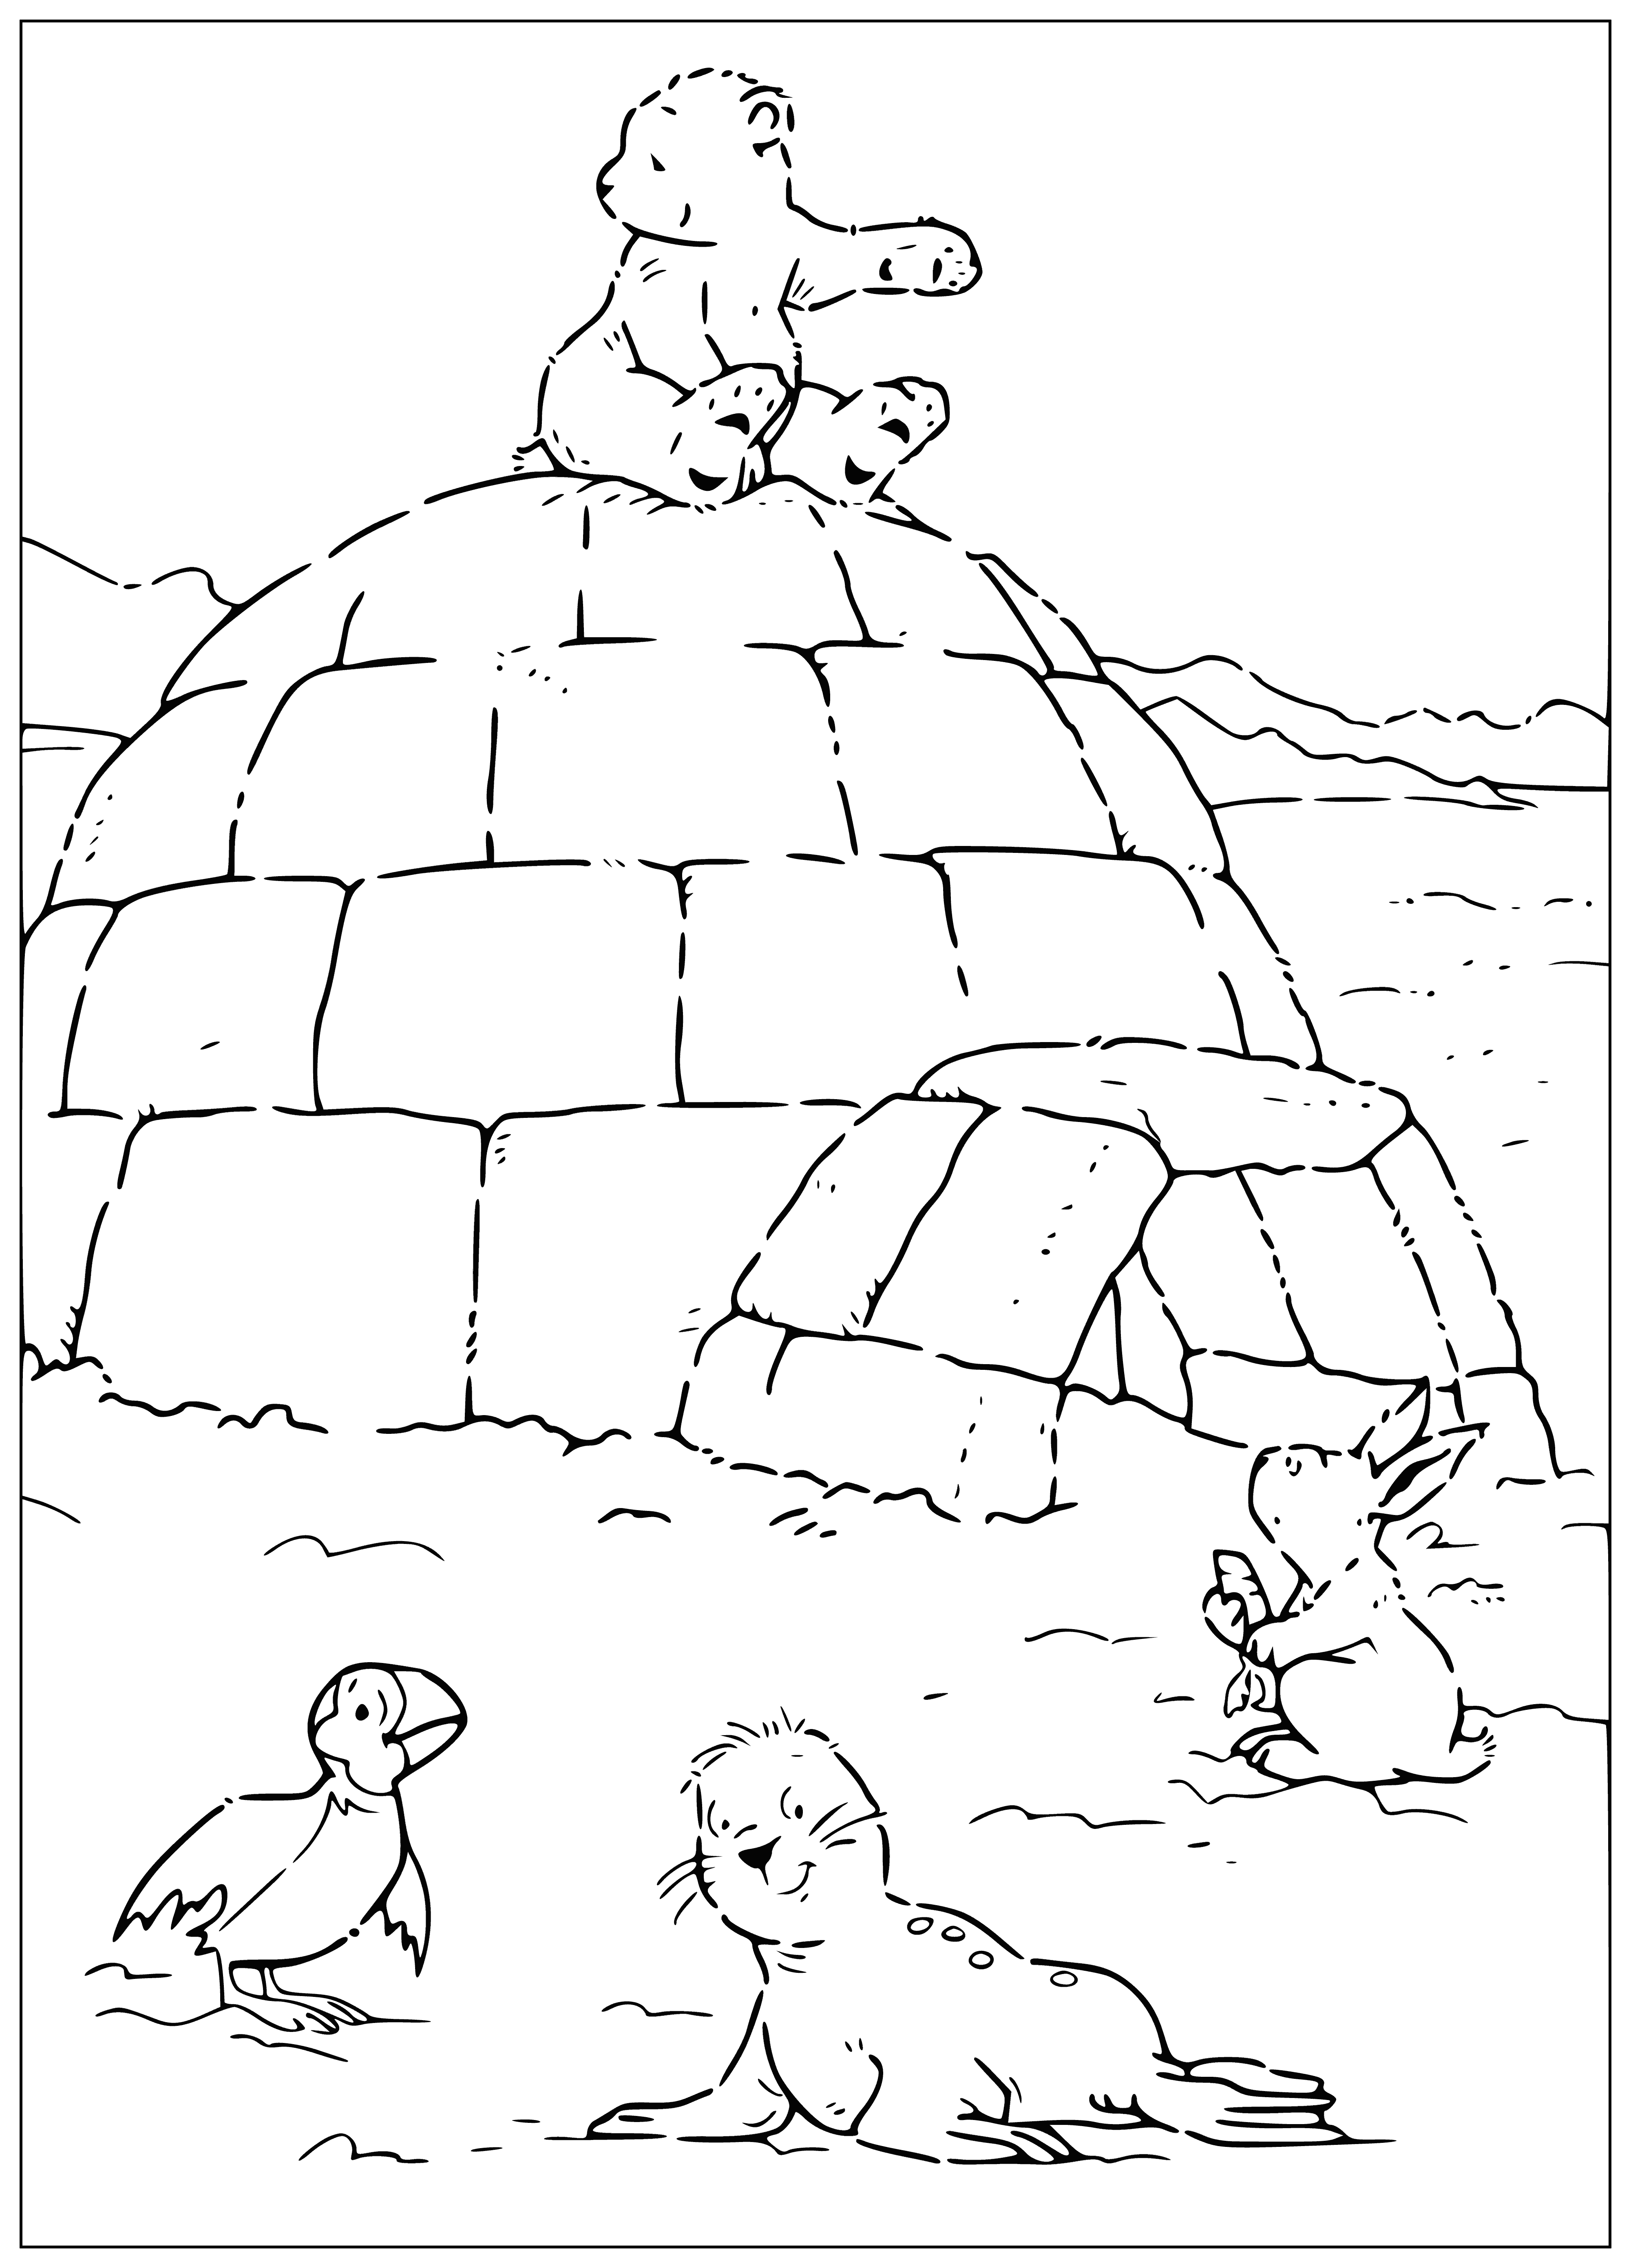 coloring page: Polar bear looks up at sky while standing on melting ice block near igloo in coloring page.